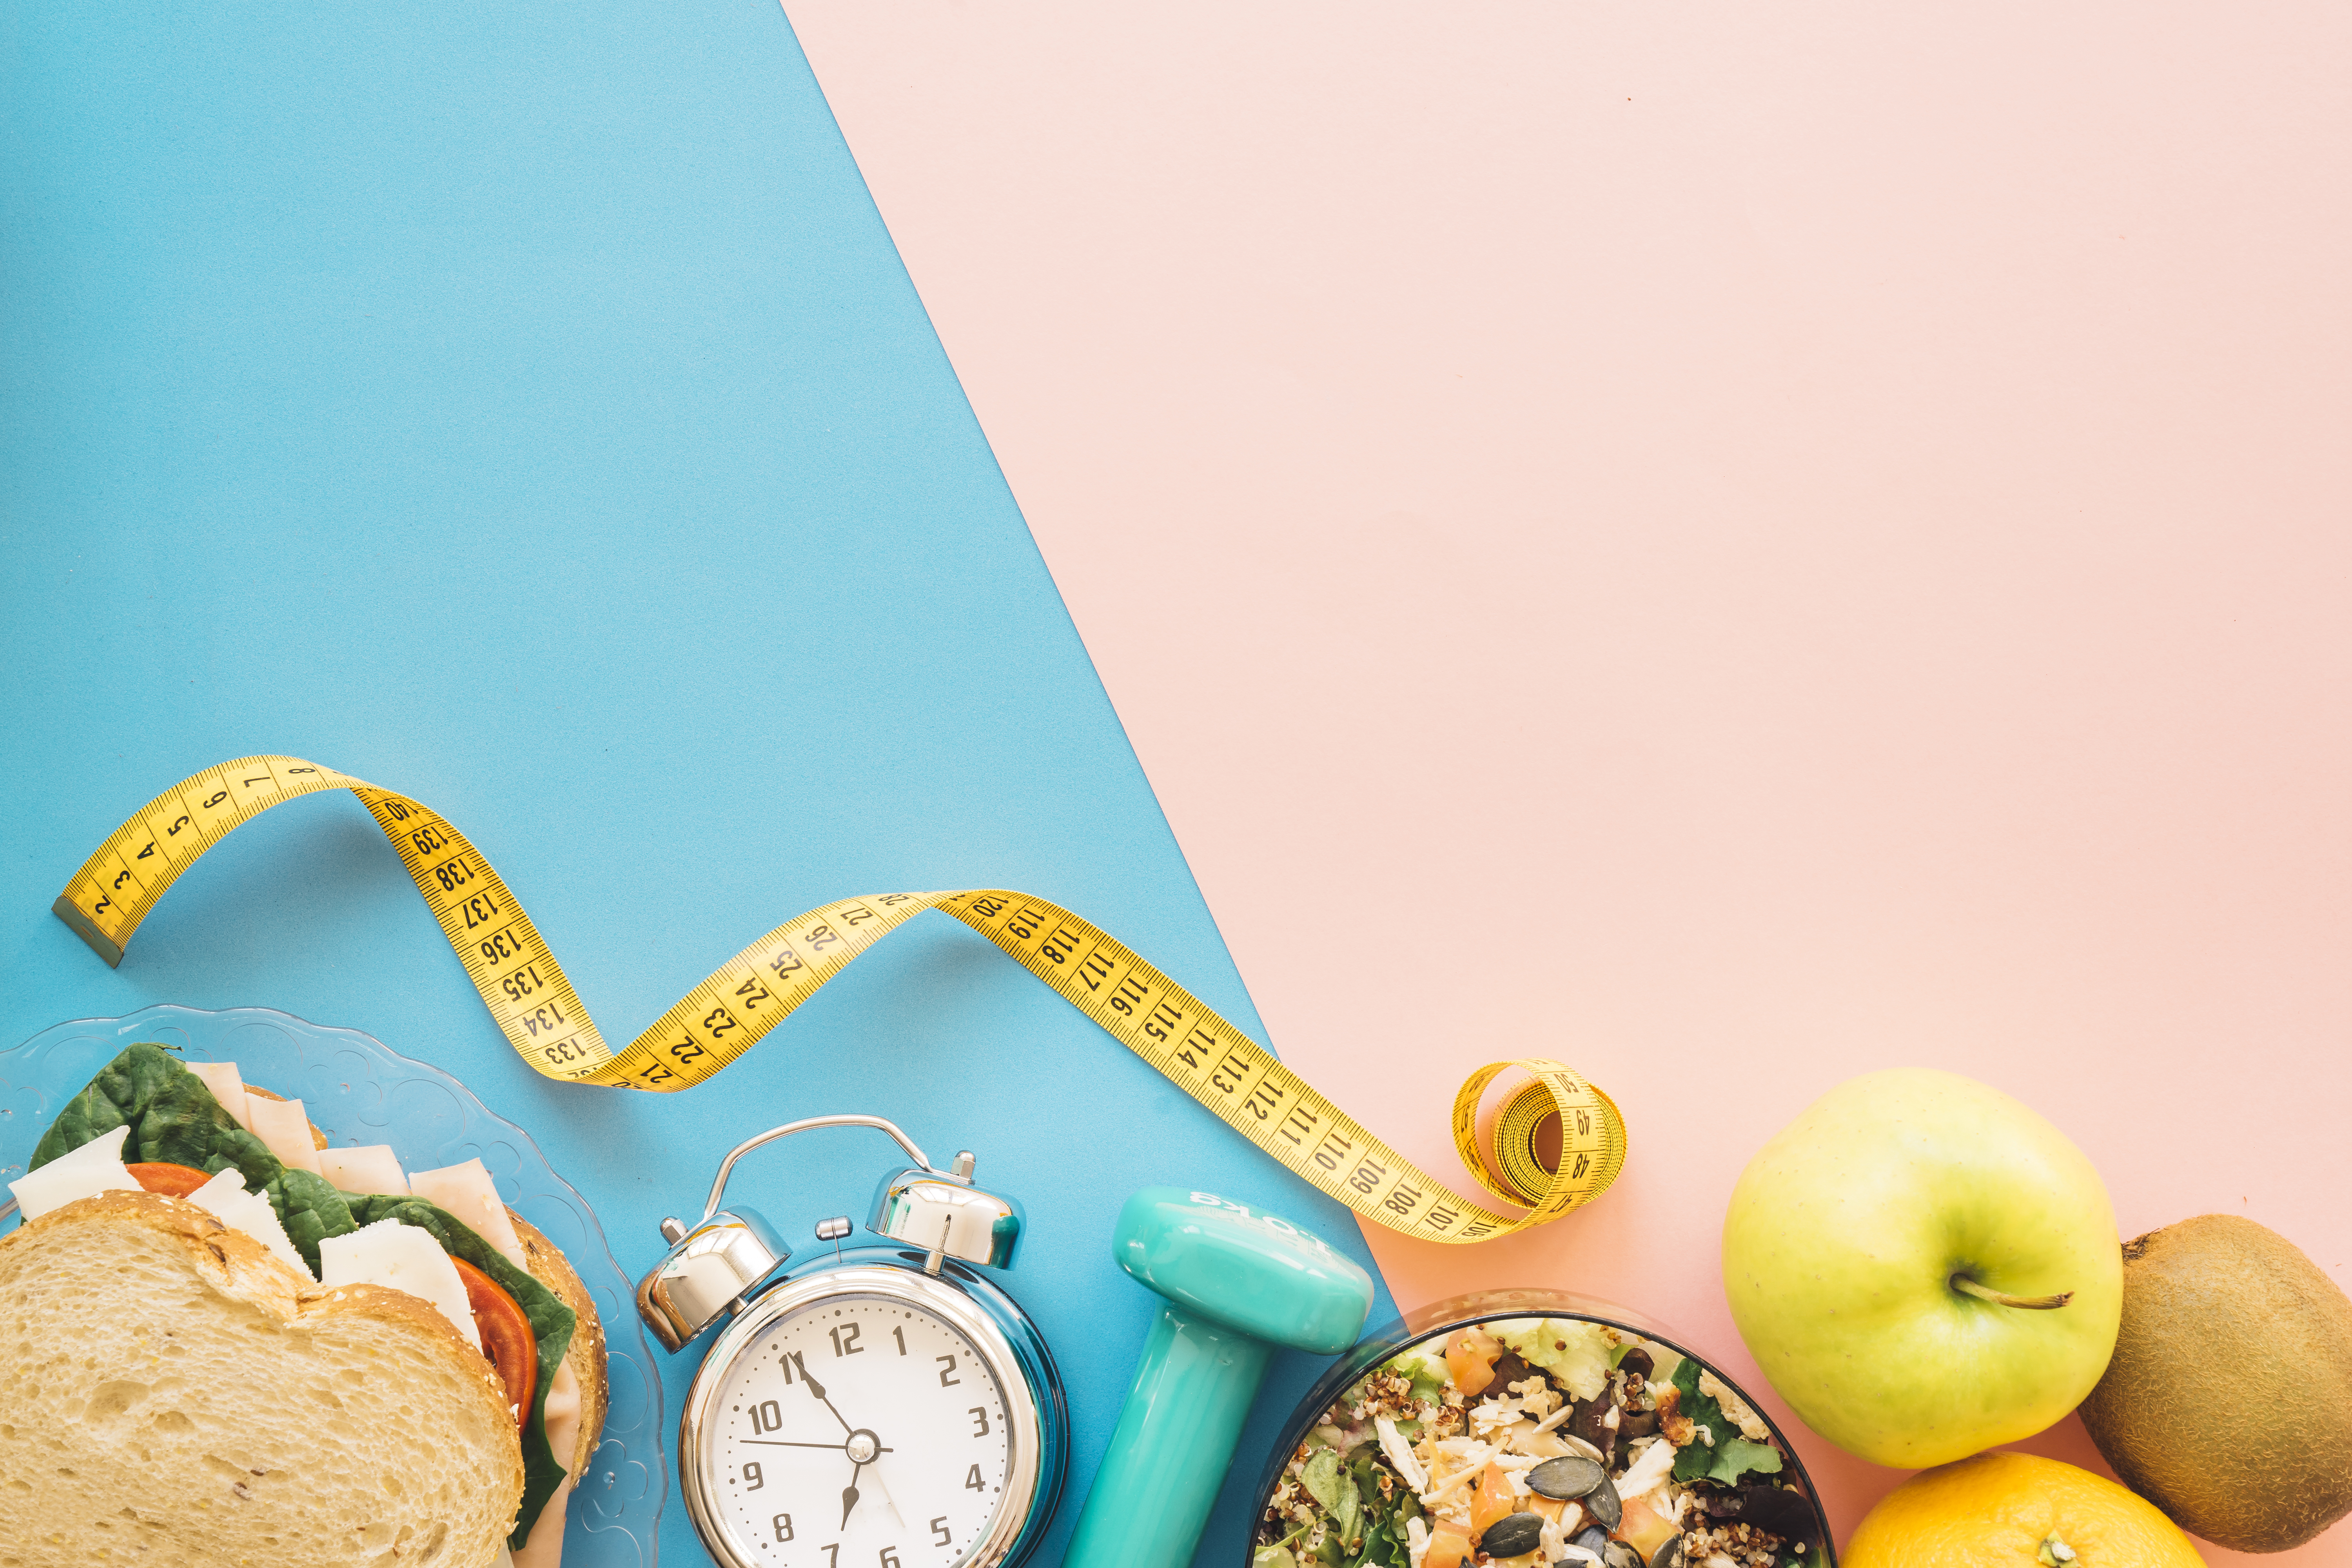 A sandwich, alarm clock, small weight, tape measure, and fruit on a blue and pink background.